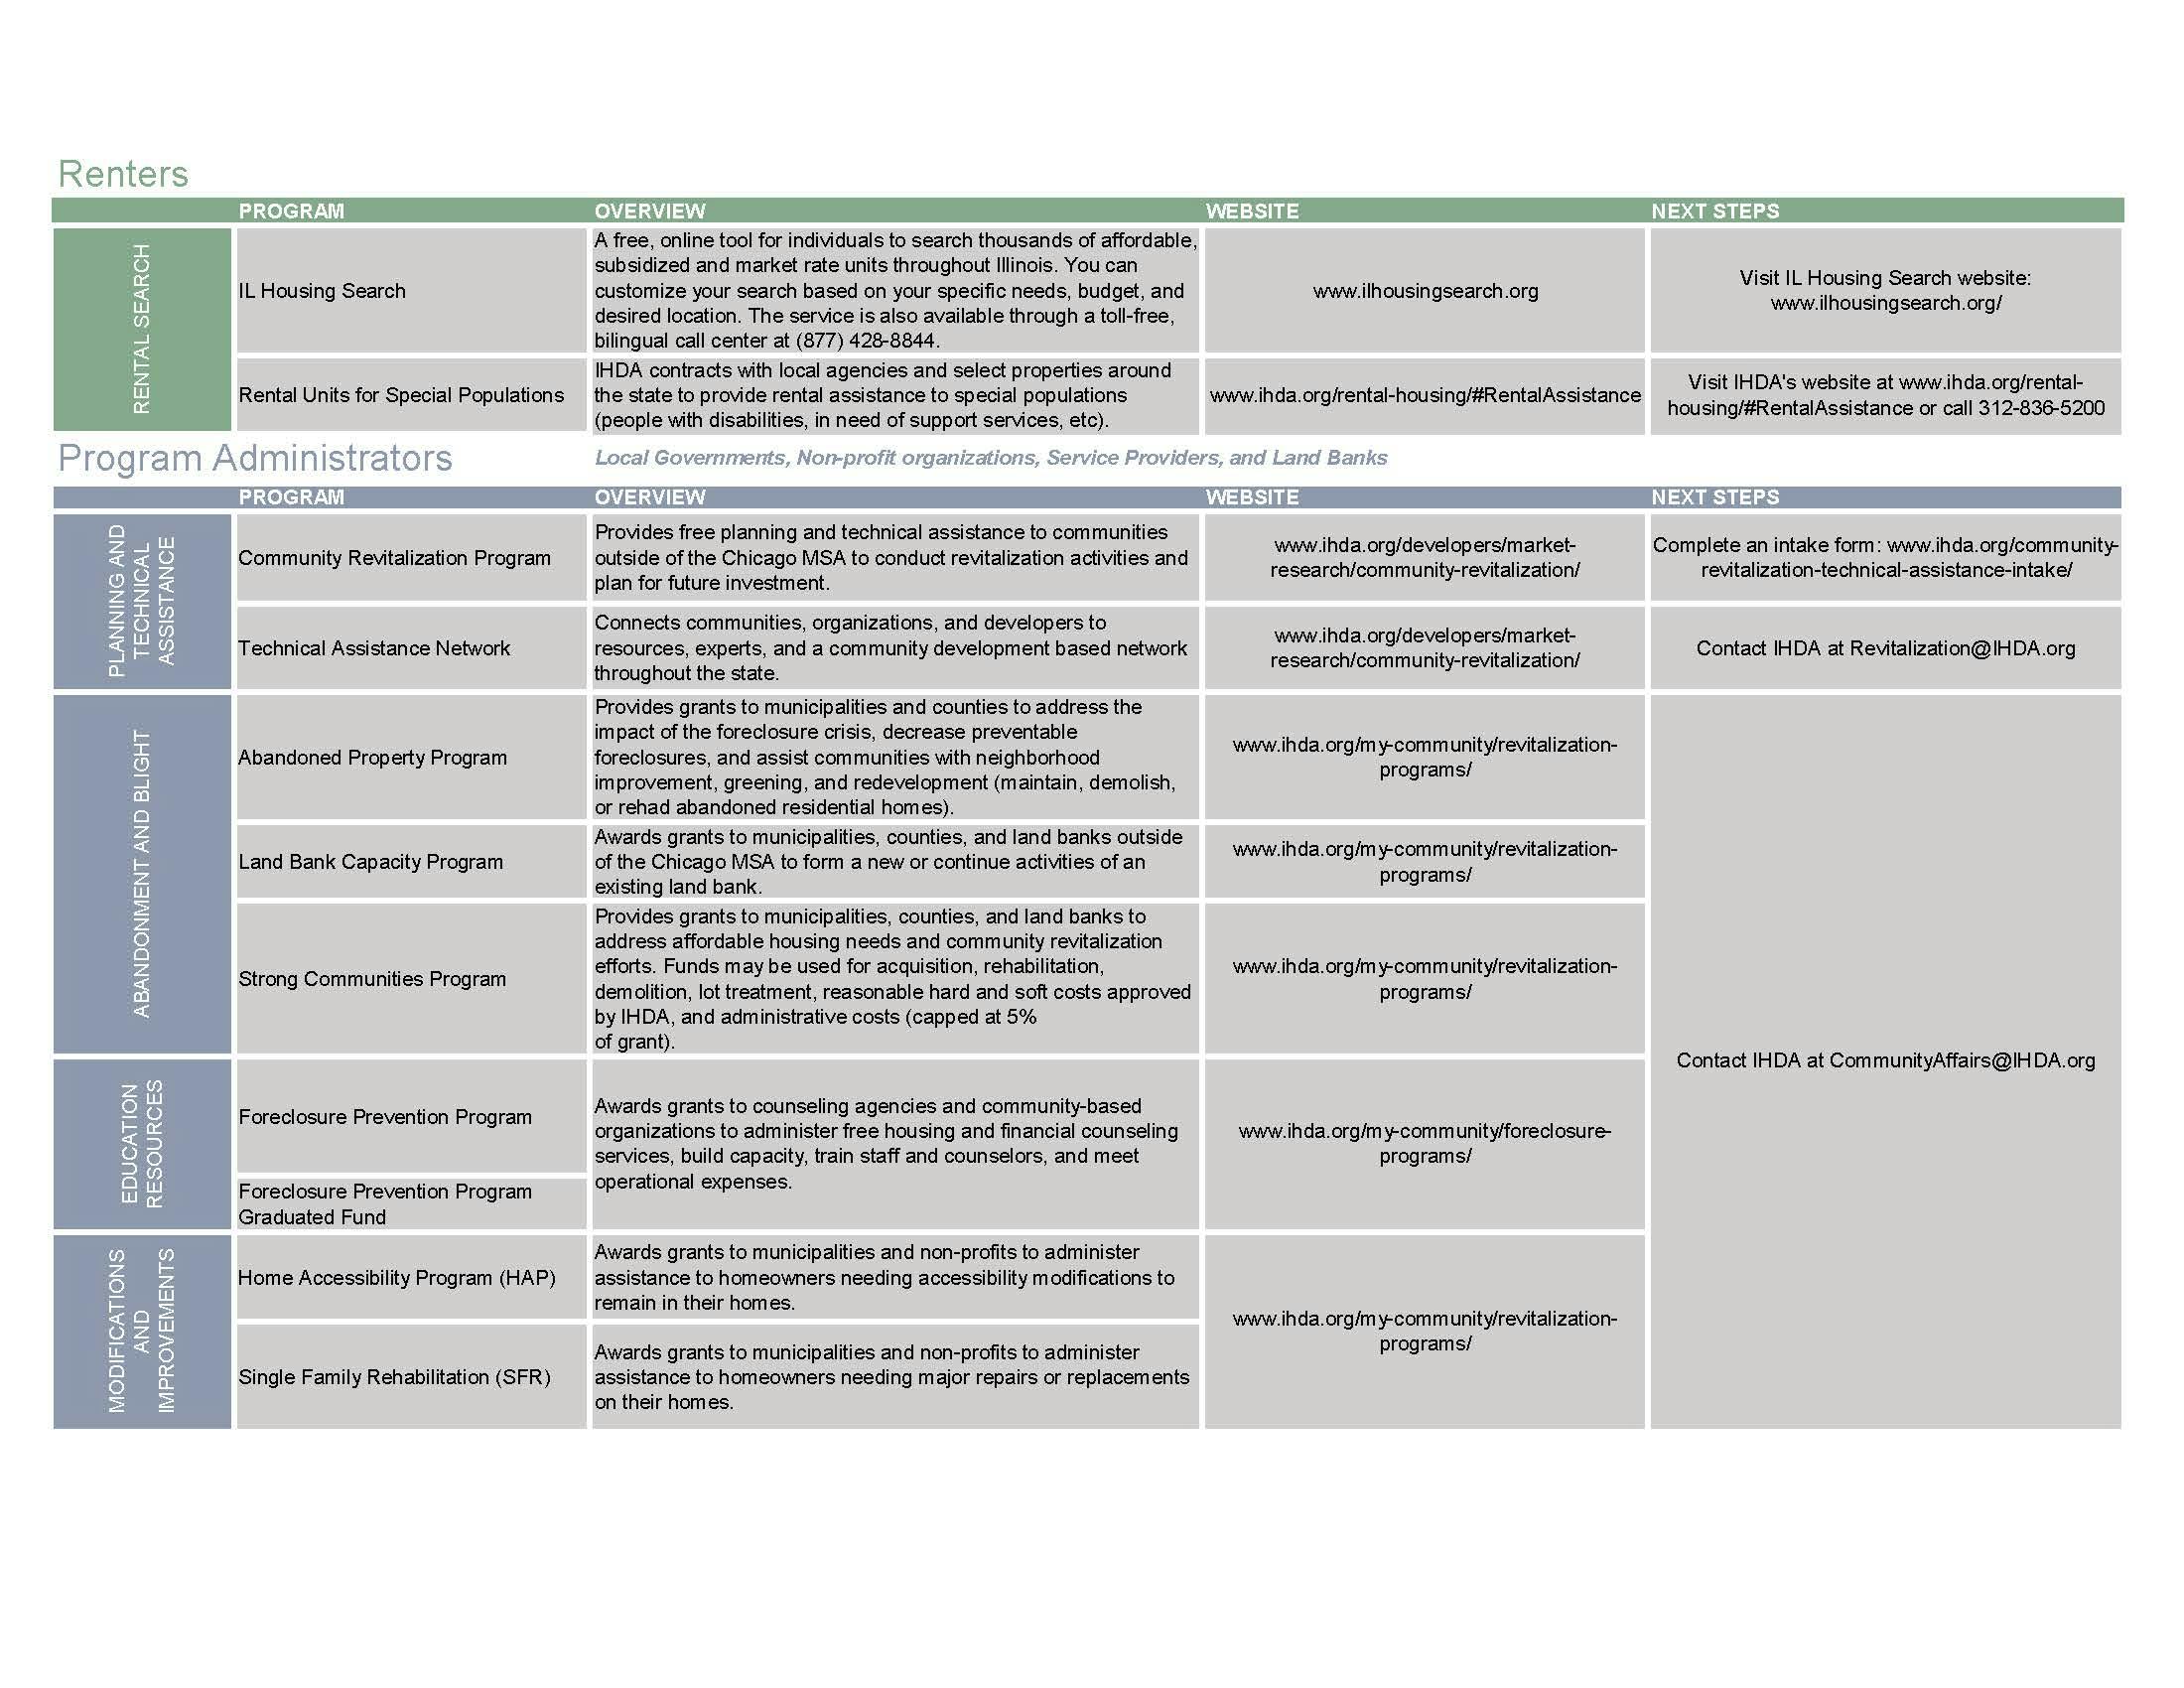 IHDA Programs and Resources Guide_Page_2.jpg